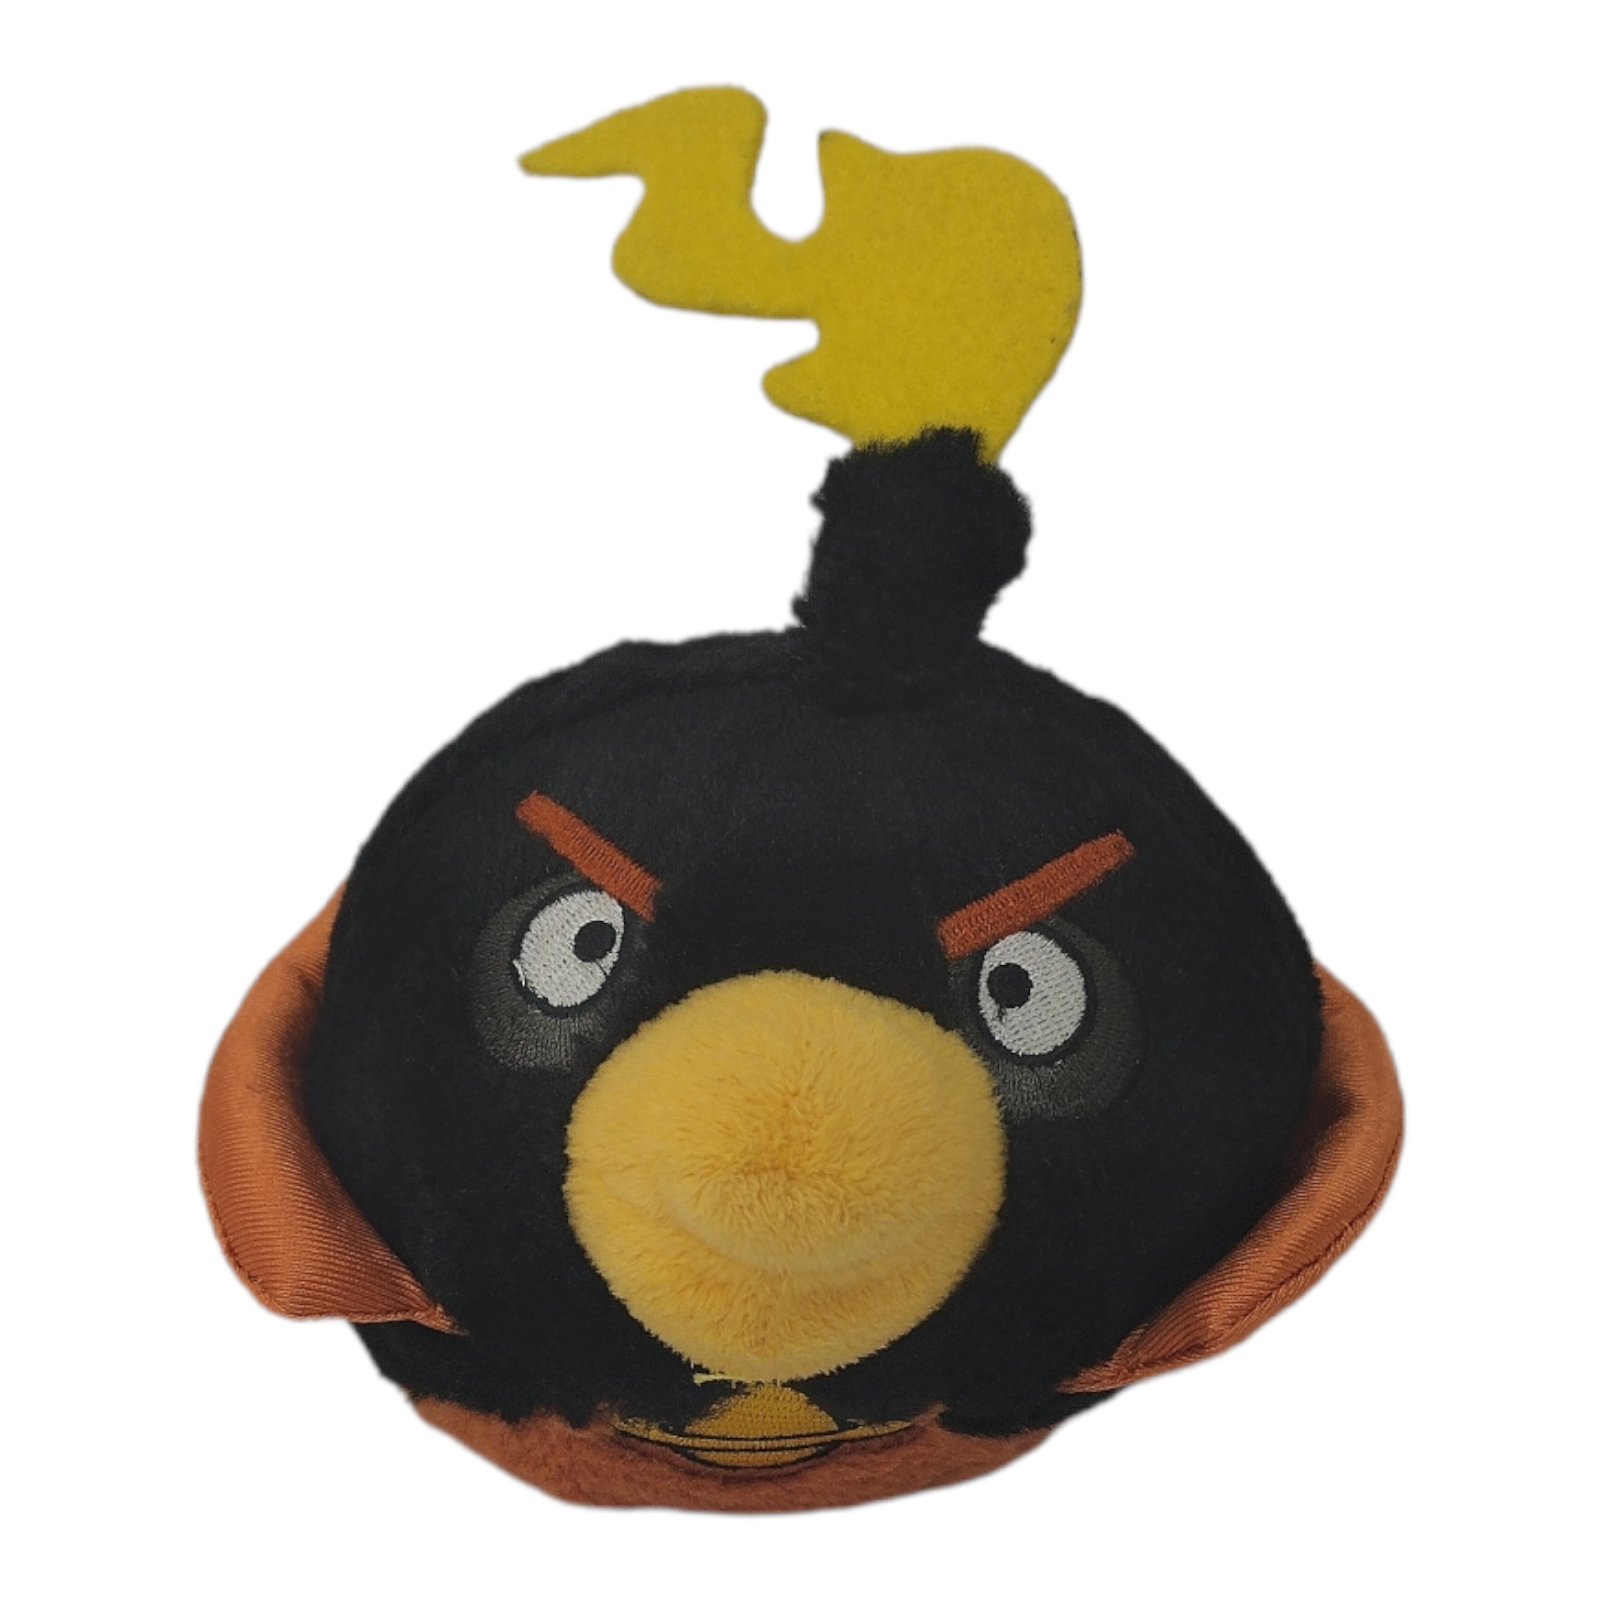 Primary image for Angry Birds Space Black Firebomb Plush 5" Stuffed Toy Commonwealth 2010 No Sound